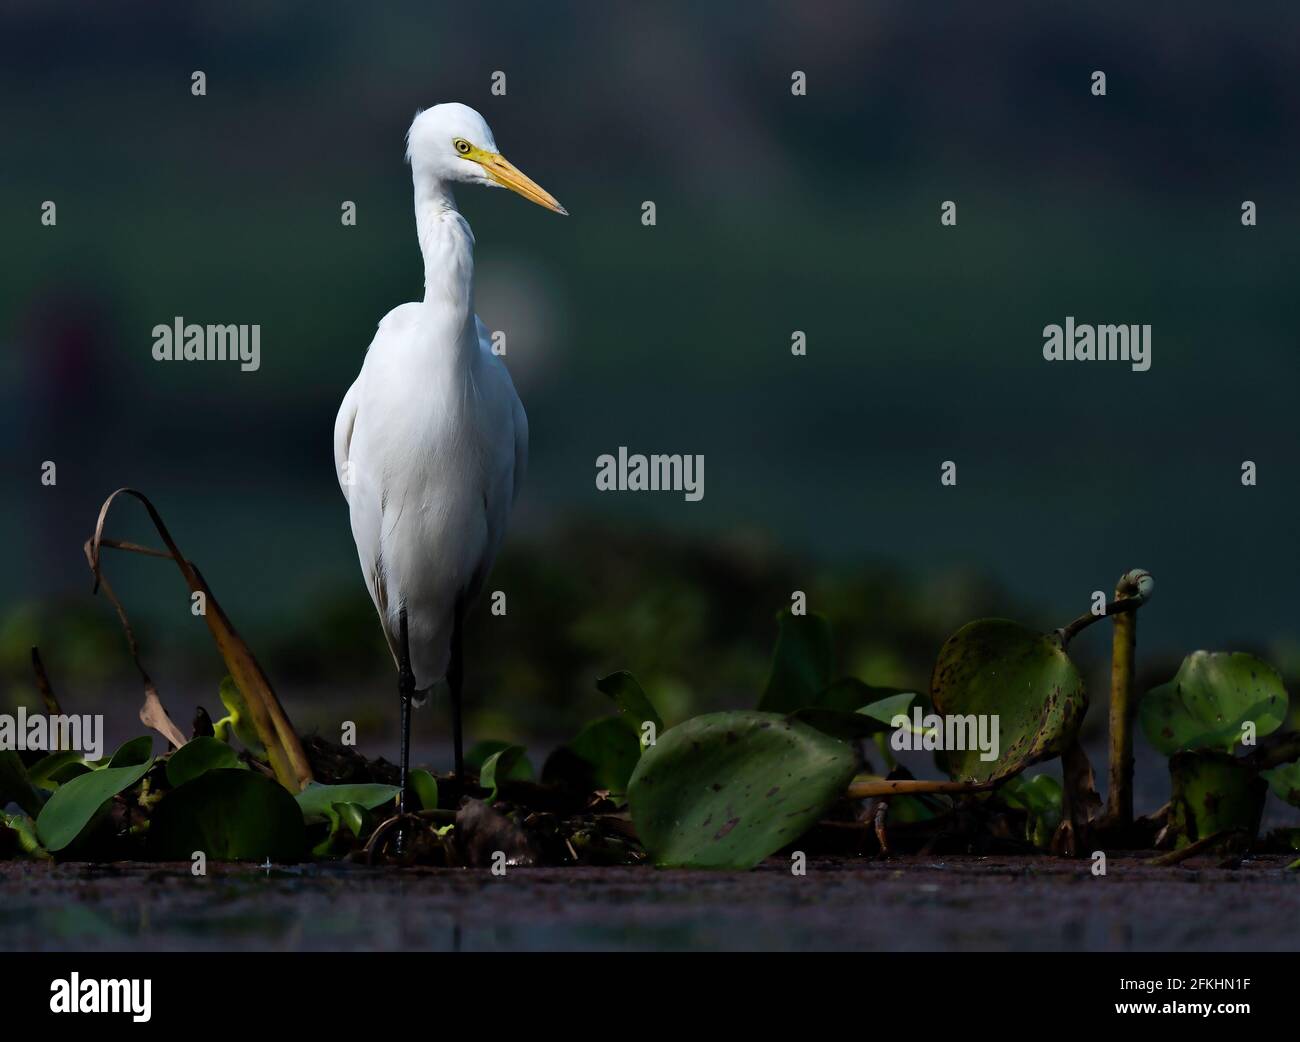 Egret in Dark Background. Good quality photograph for desktop wallpaper or magazines. Stock Photo